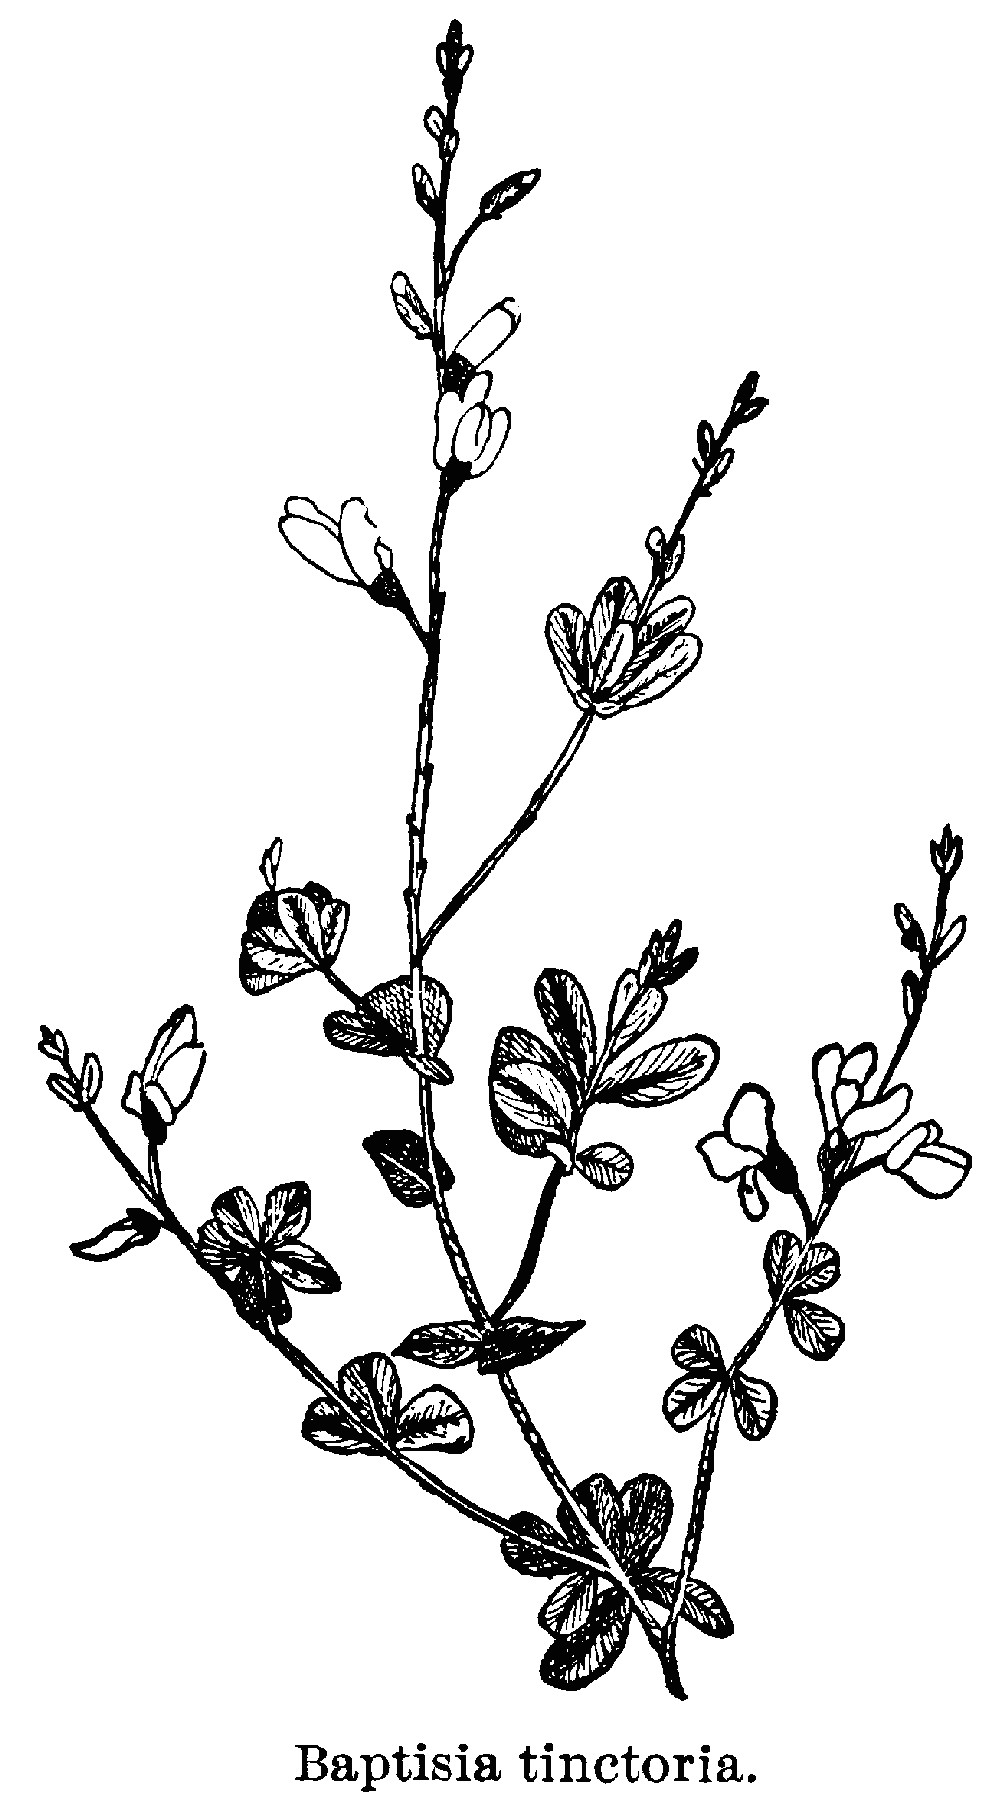 Drawings Of Flowers On Branches Thyme Flower Drawing Flowering Branch Templates Drawings